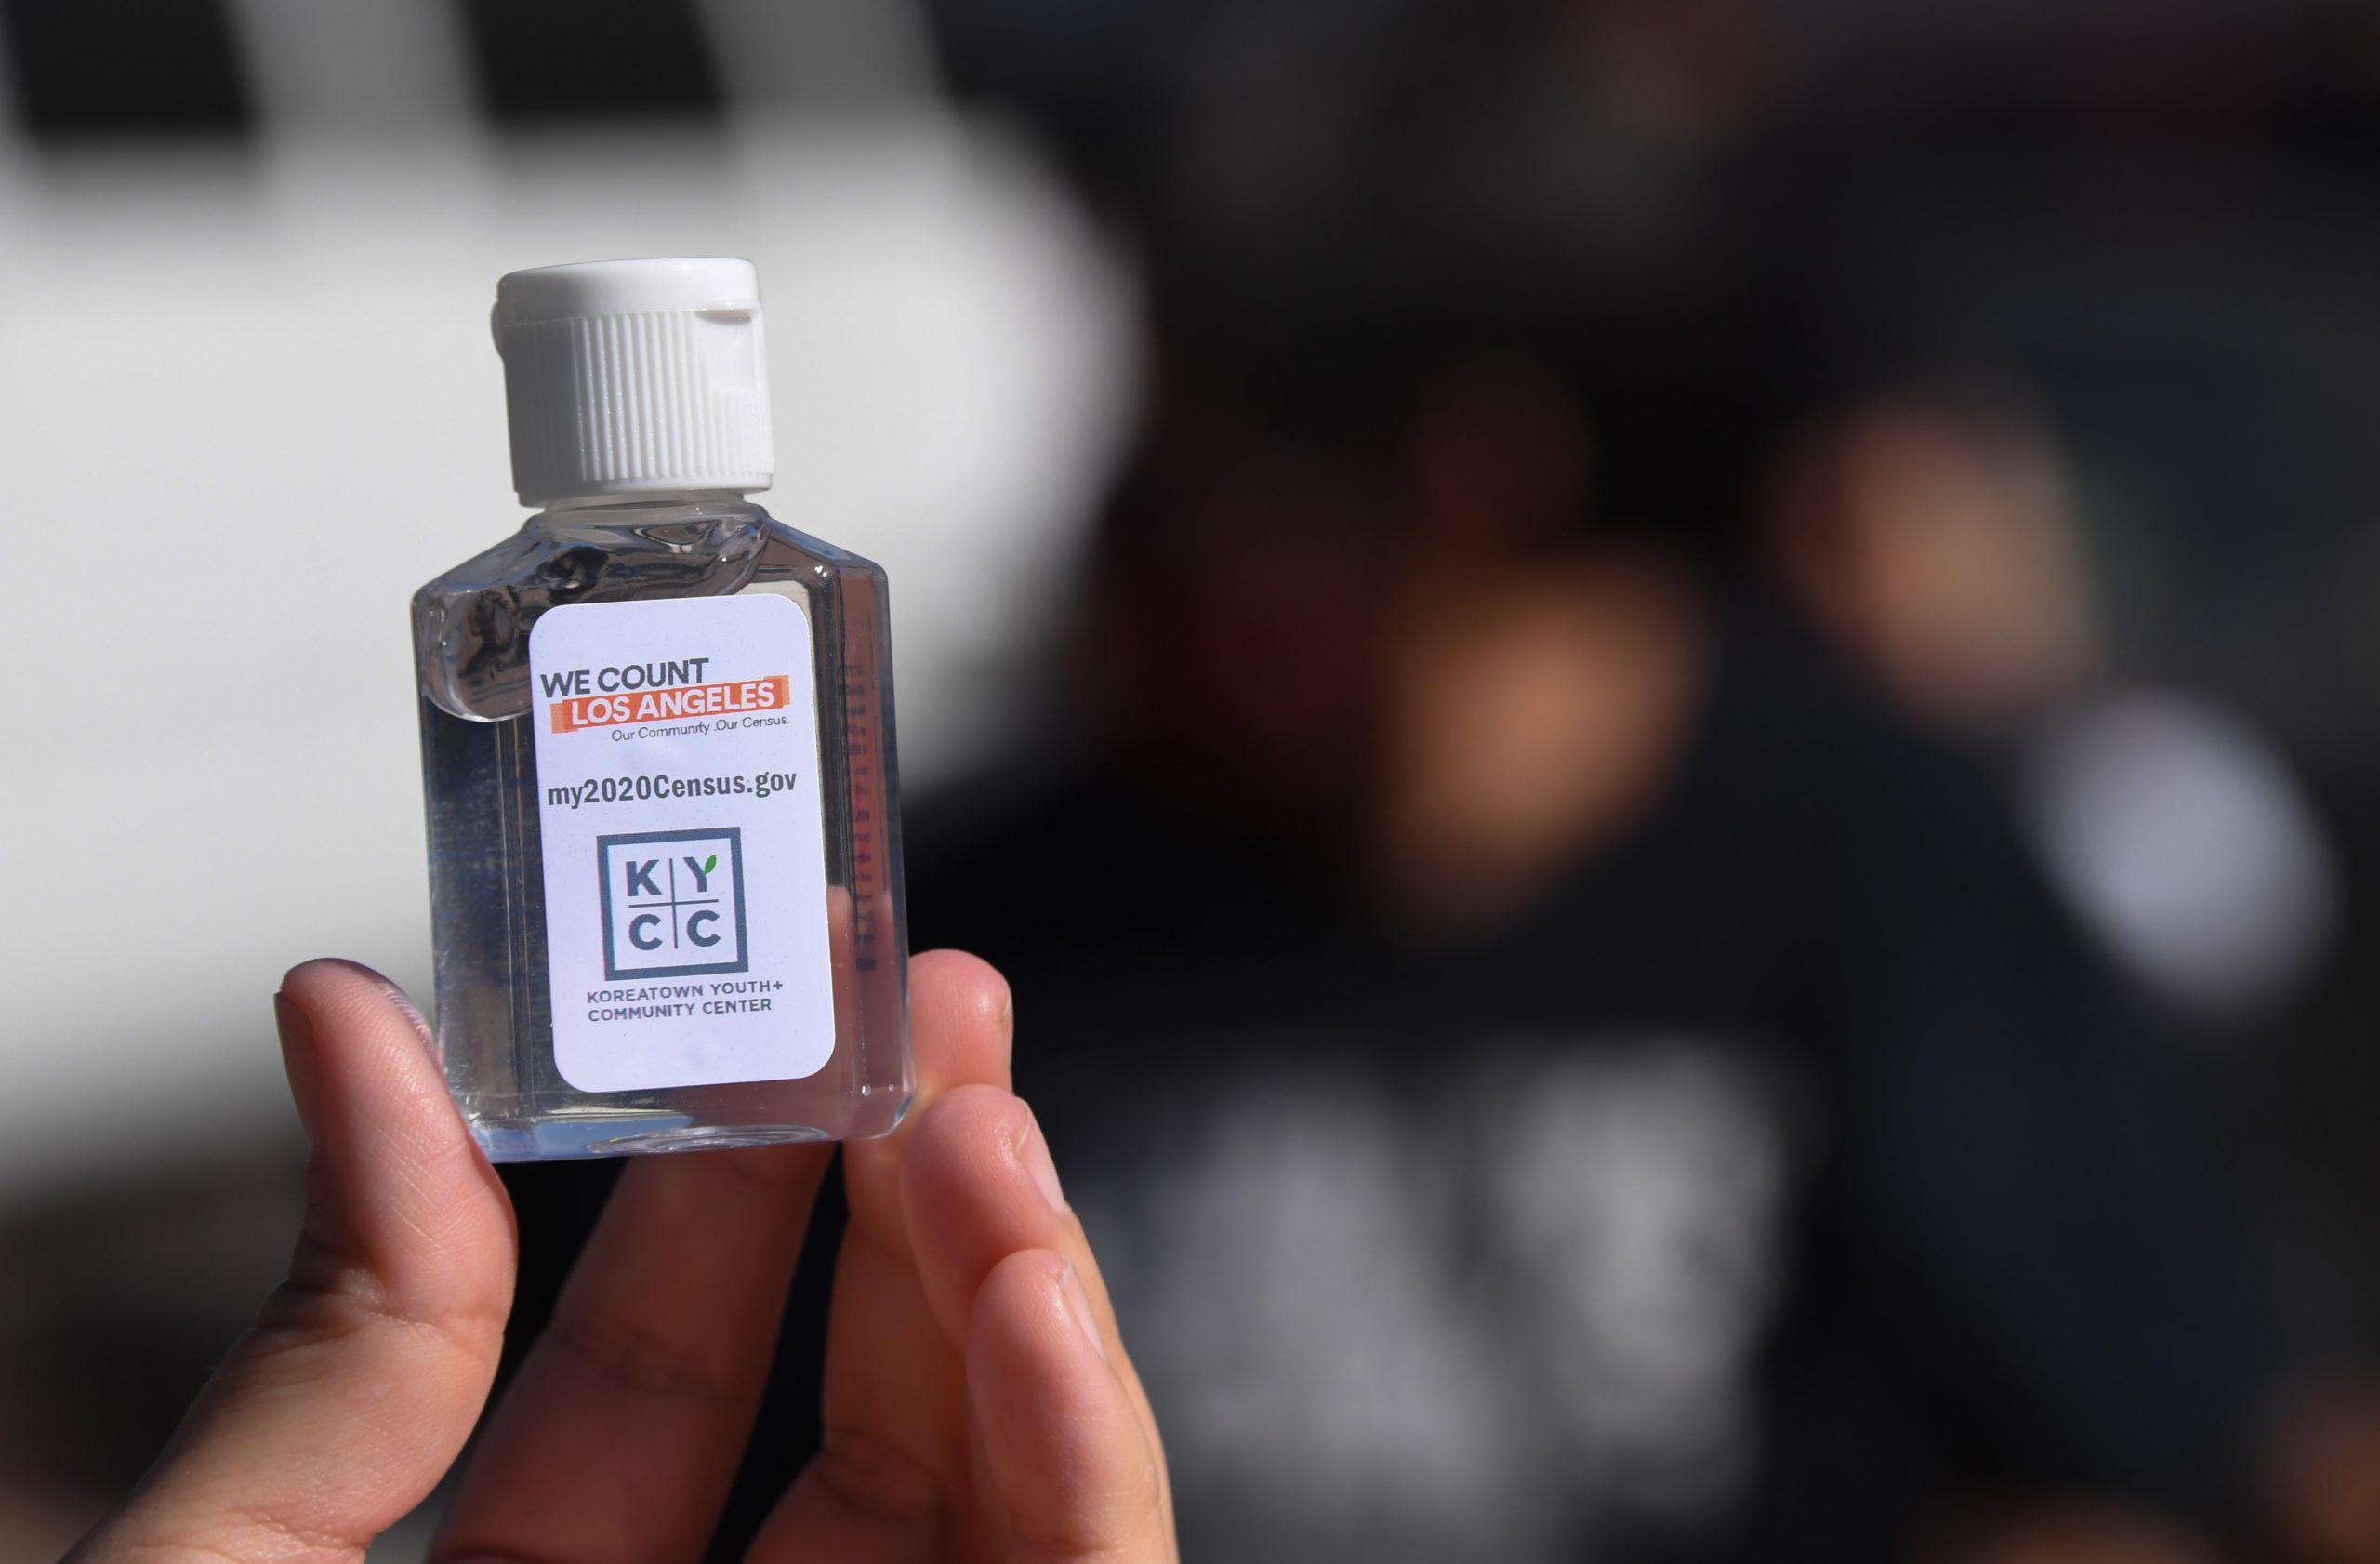 A volunteer displays a bottle of hand sanitzer labeled with information about the US Census which she is passing out to encourage people to complete the Census, at a food distribution bank for people facing economic hardship or food insecurity, in a church parking lot in Los Angeles, California, August 10, 2020 amid the COVID-19 pandemic. - The result of the Census, which the Census Bureau announced it would end one month early, on September 30, directly affects the amount of funding a community receives for services including public schools, hospitals and fire departments. (Photo by Robyn Beck / AFP) (Photo by ROBYN BECK/AFP via Getty Images)